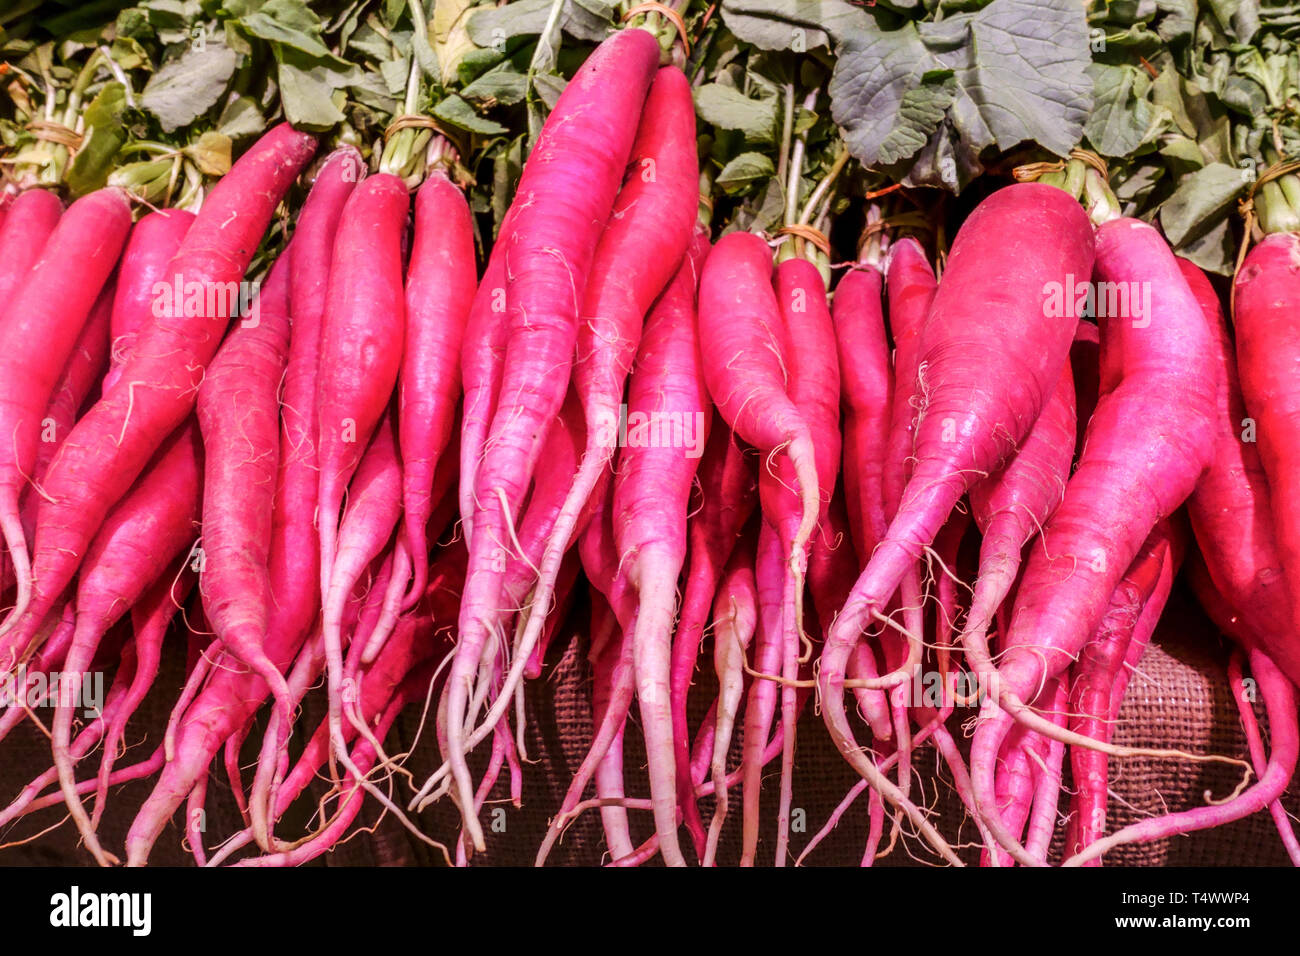 Long red radishes roots Vegetable market Spain Stock Photo